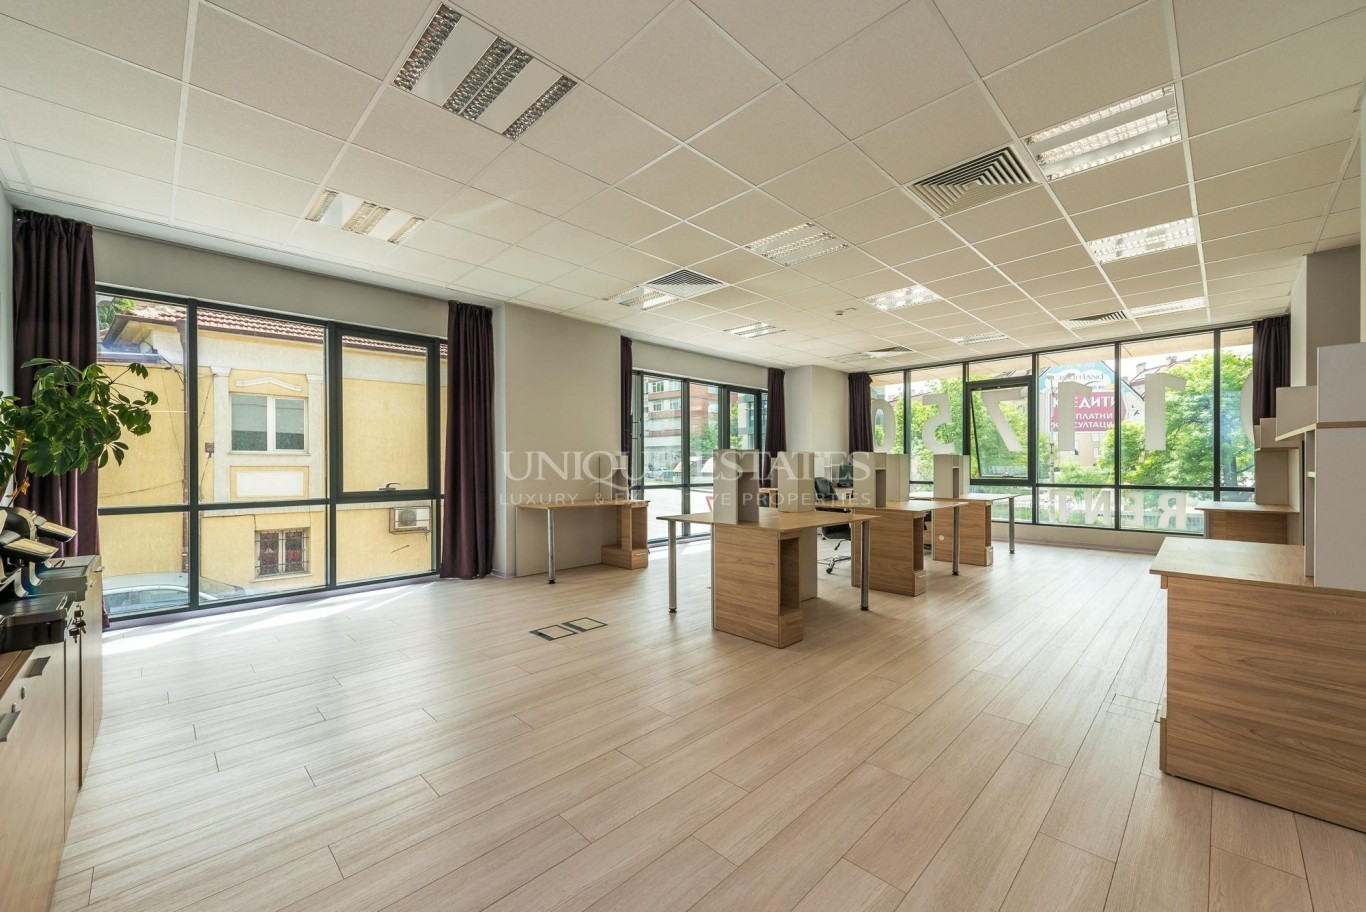 Office for sale in Sofia, Lozenets with listing ID: K8735 - image 6